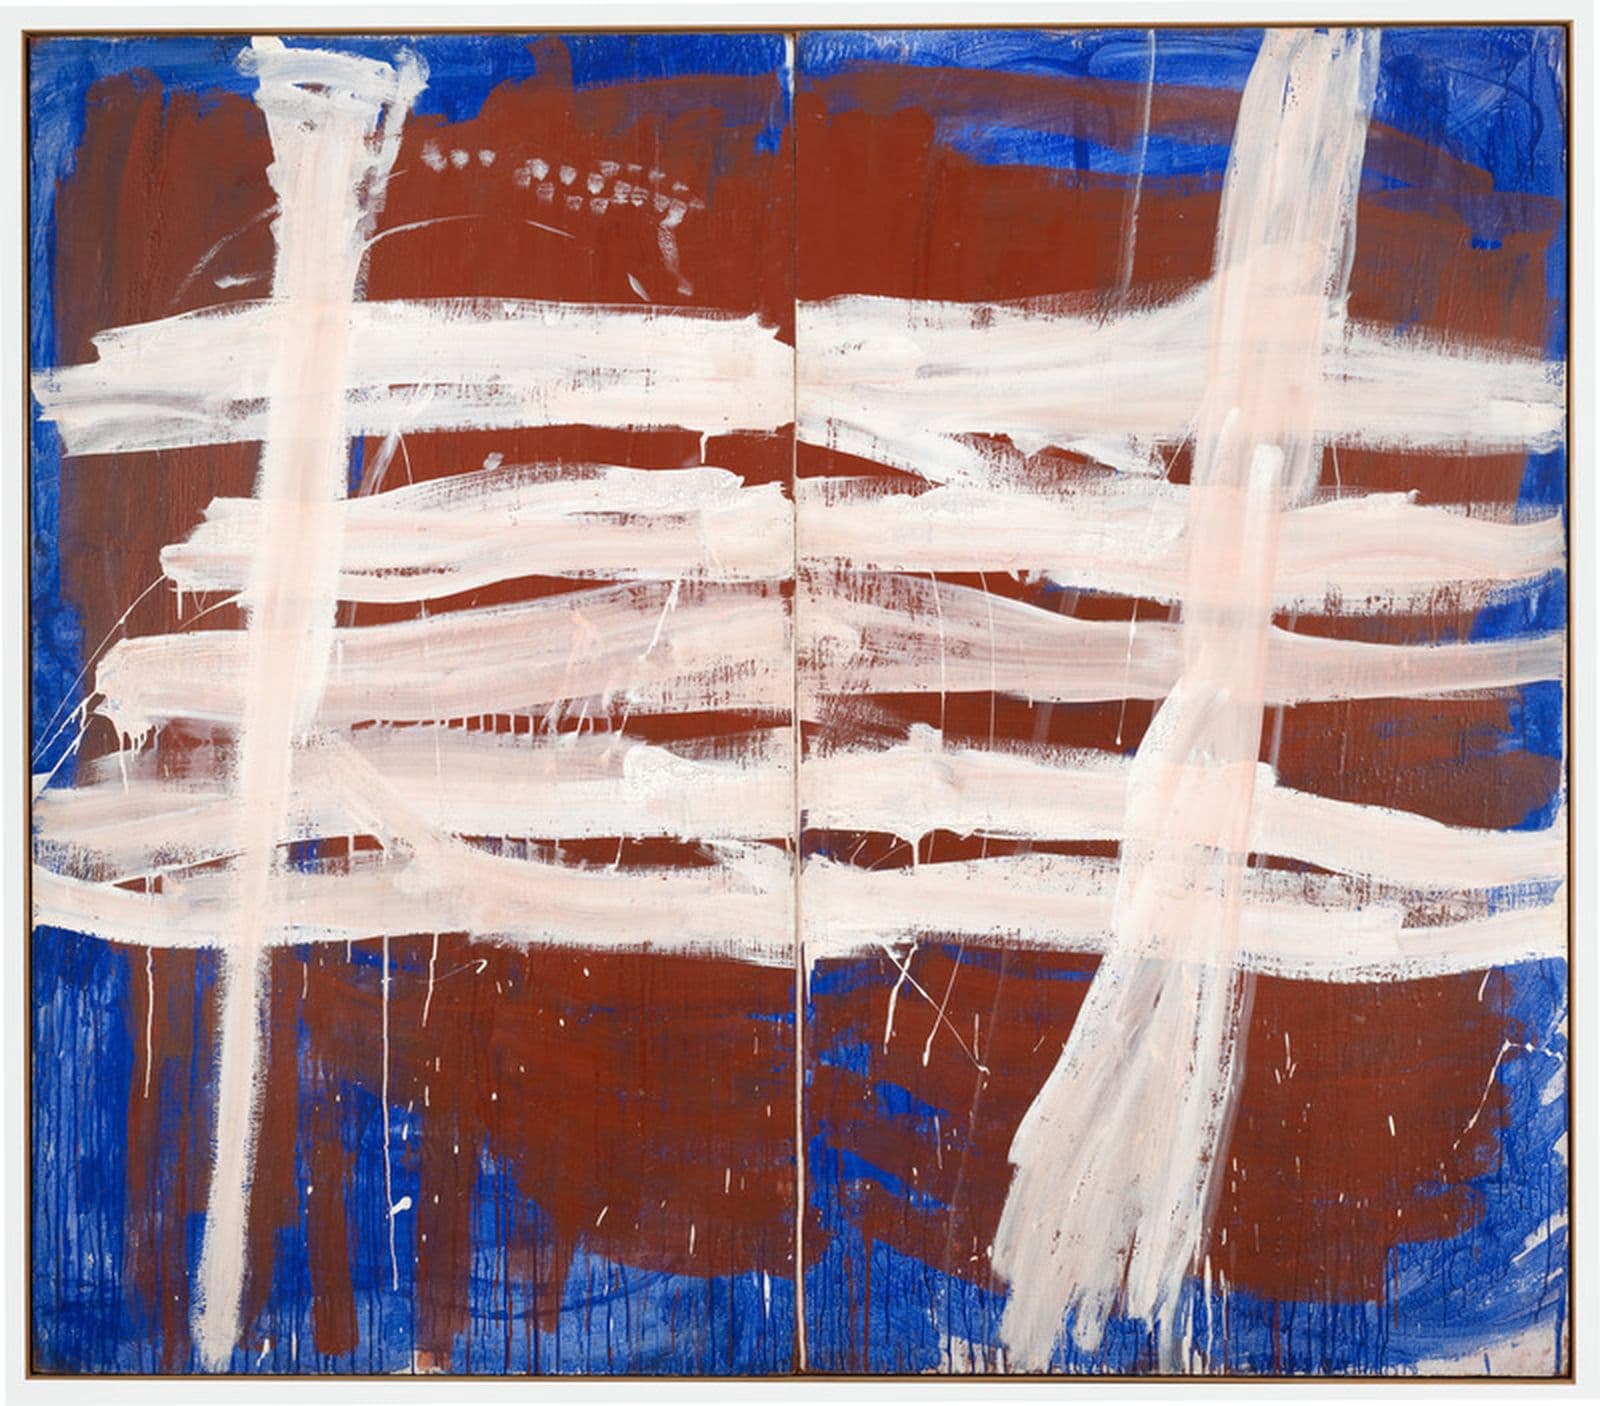 An abstract painting with a blue base, splashes of red, then topped with white.